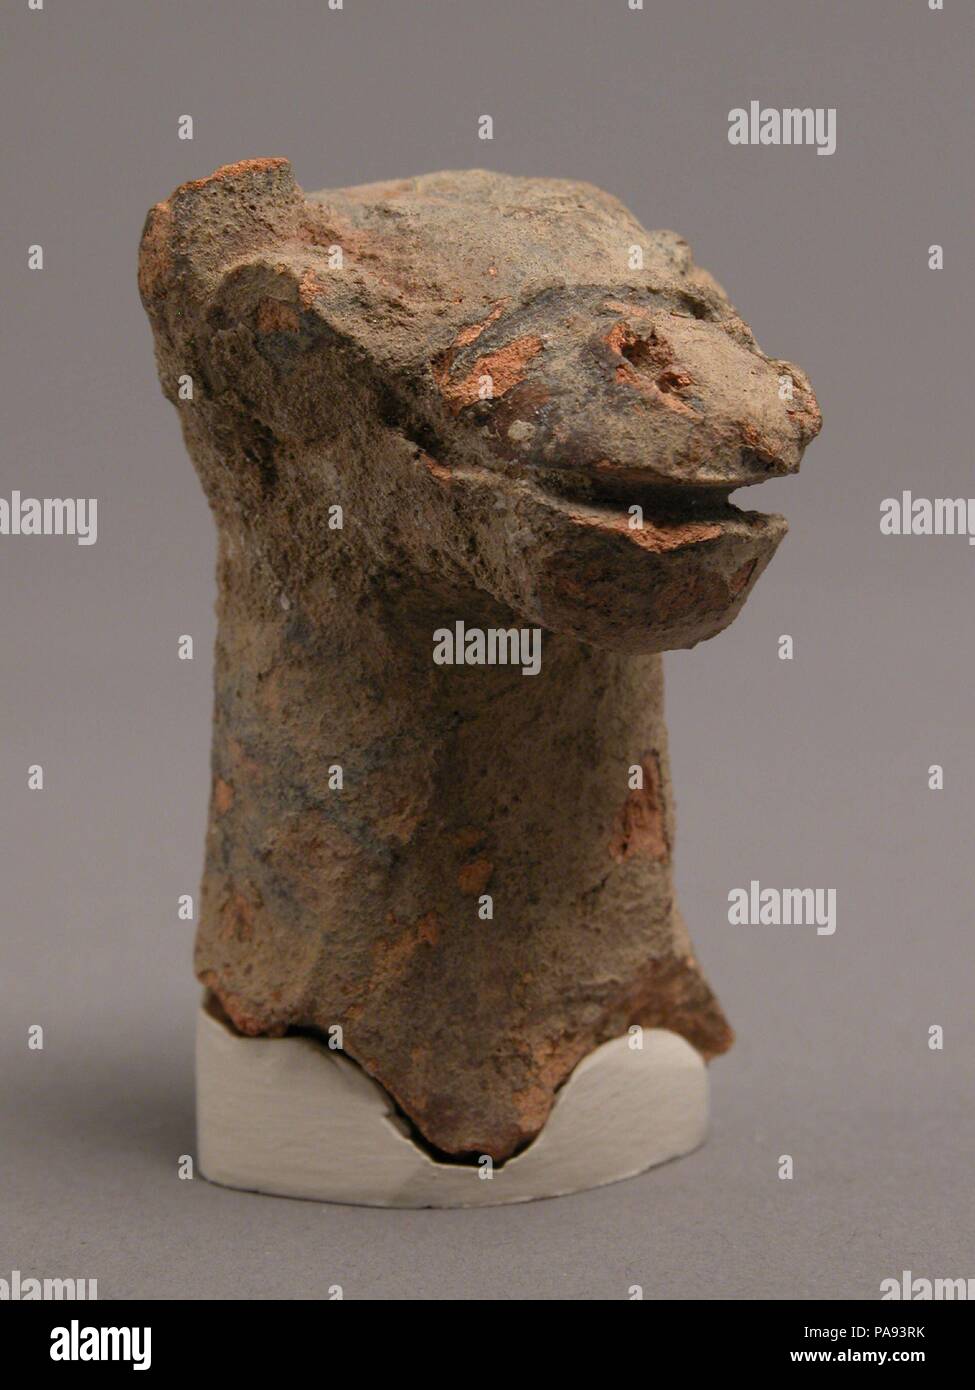 Head of Camel. Culture: Coptic. Dimensions: Overall: 2 3/8 x 1 7/16 x 1  9/16 in. (6 x 3.6 x 3.9 cm). Date: 4th-7th century. Museum: Metropolitan  Museum of Art, New York, USA Stock Photo - Alamy